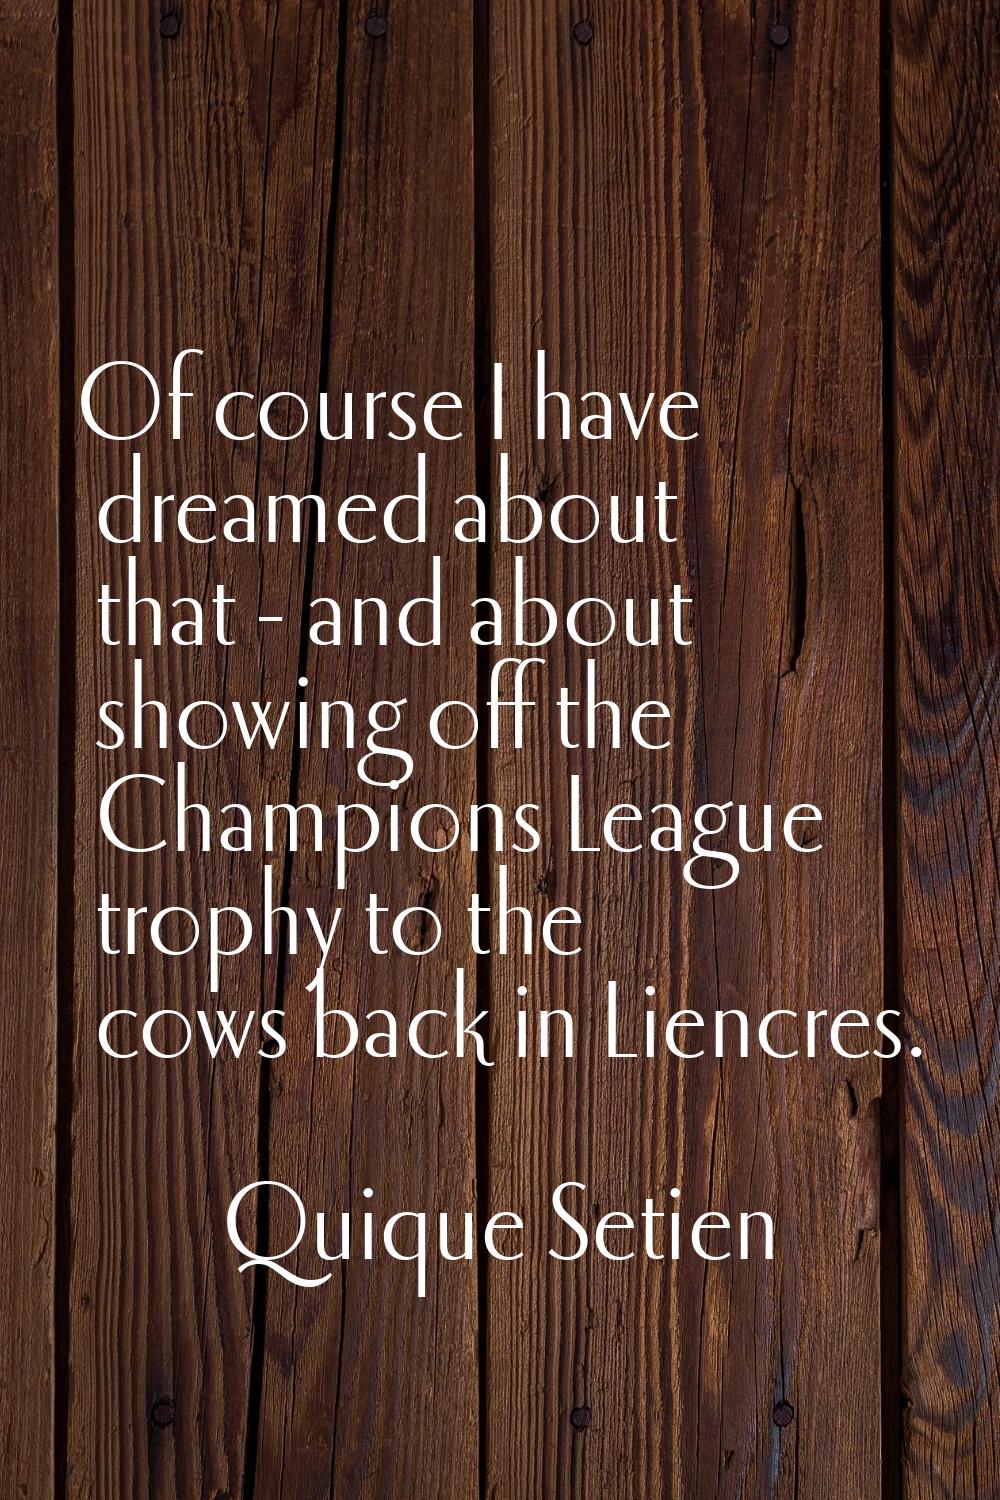 Of course I have dreamed about that - and about showing off the Champions League trophy to the cows